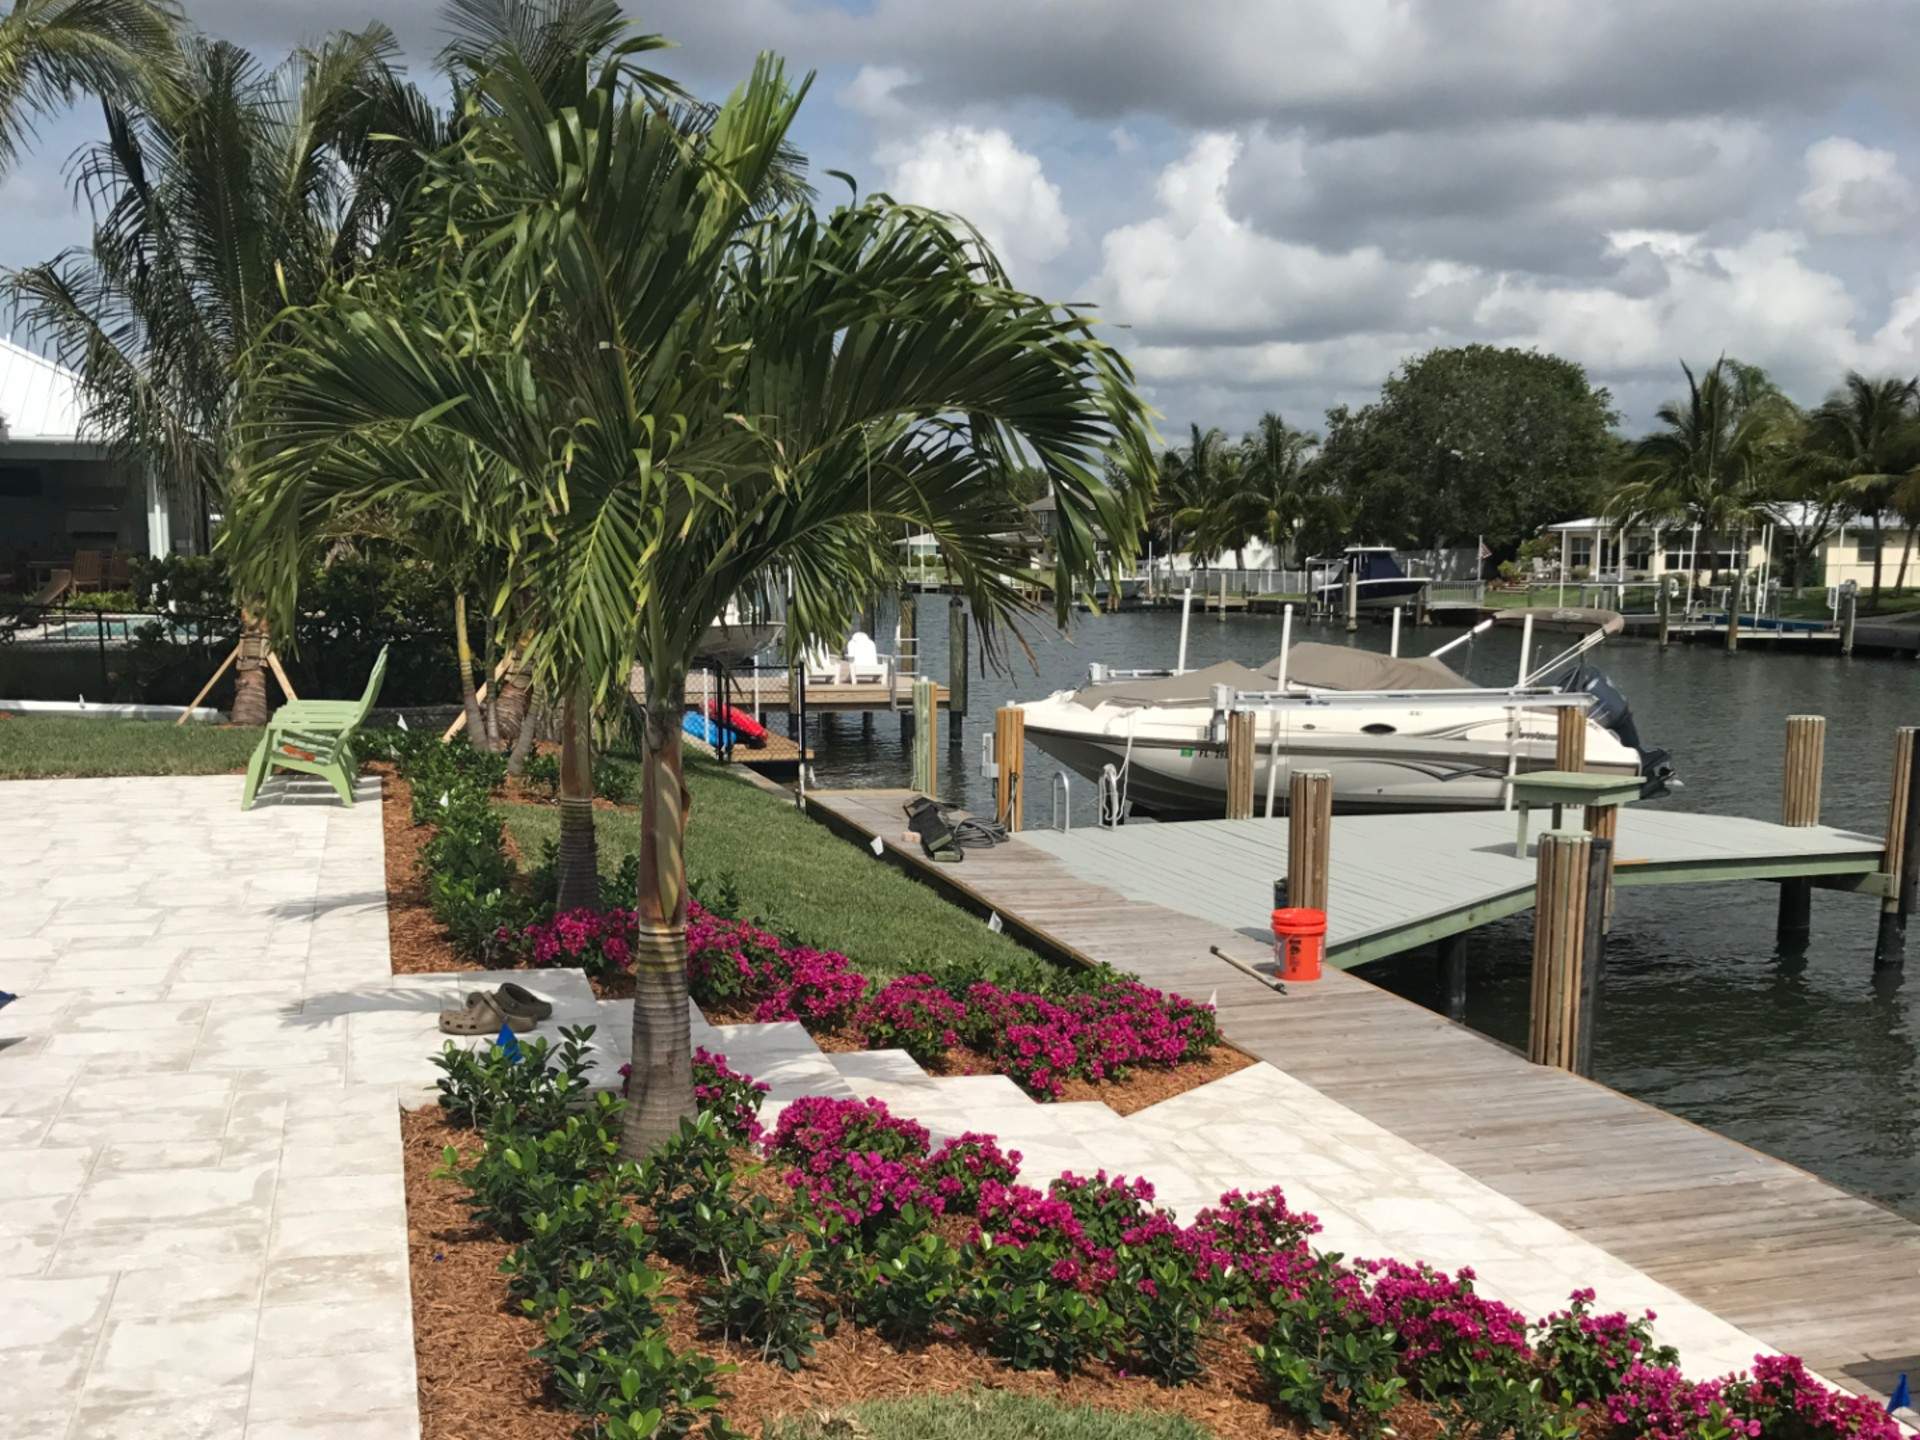 Palm trees and flowers in front of a dock with a boat